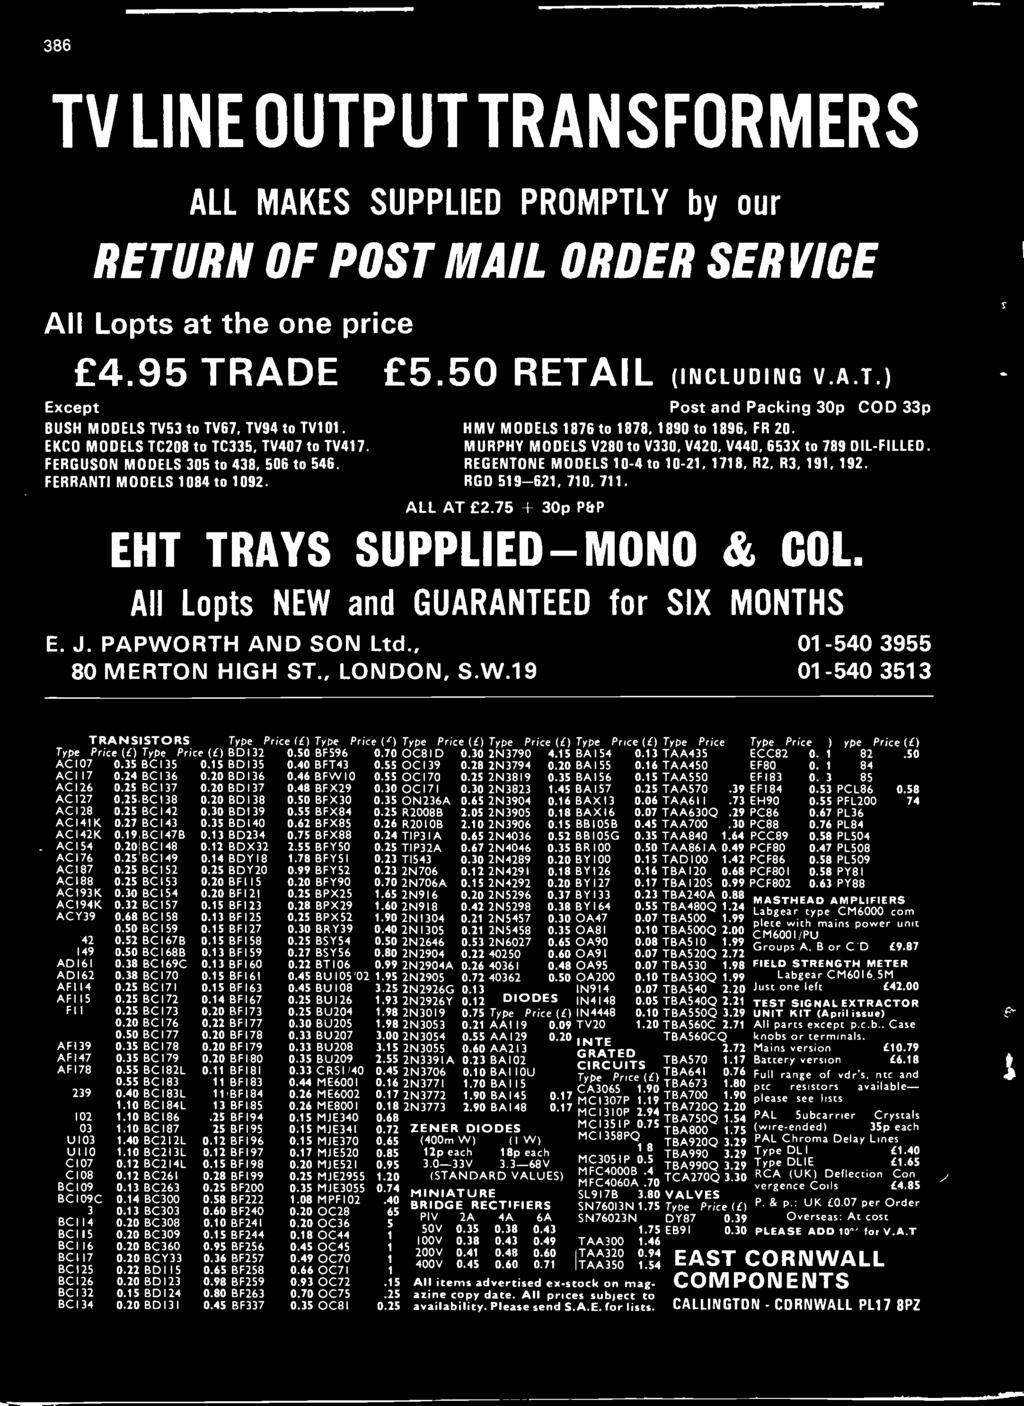 386 TV LINE OUTPUT TRANSFORMERS ALL MAKES SUPPLIED PROMPTLY by our RETURN OF POST MAIL ORDER SERVICE All Lopts at the one price Except 4.95 TRADE 5.50 RETAIL (INCLUDING V.A.T.) BUSH MODELS TV53 to TV67, TV94 to TV101 EKCO MODELS TC208 to TC335, TV407 to TV417.